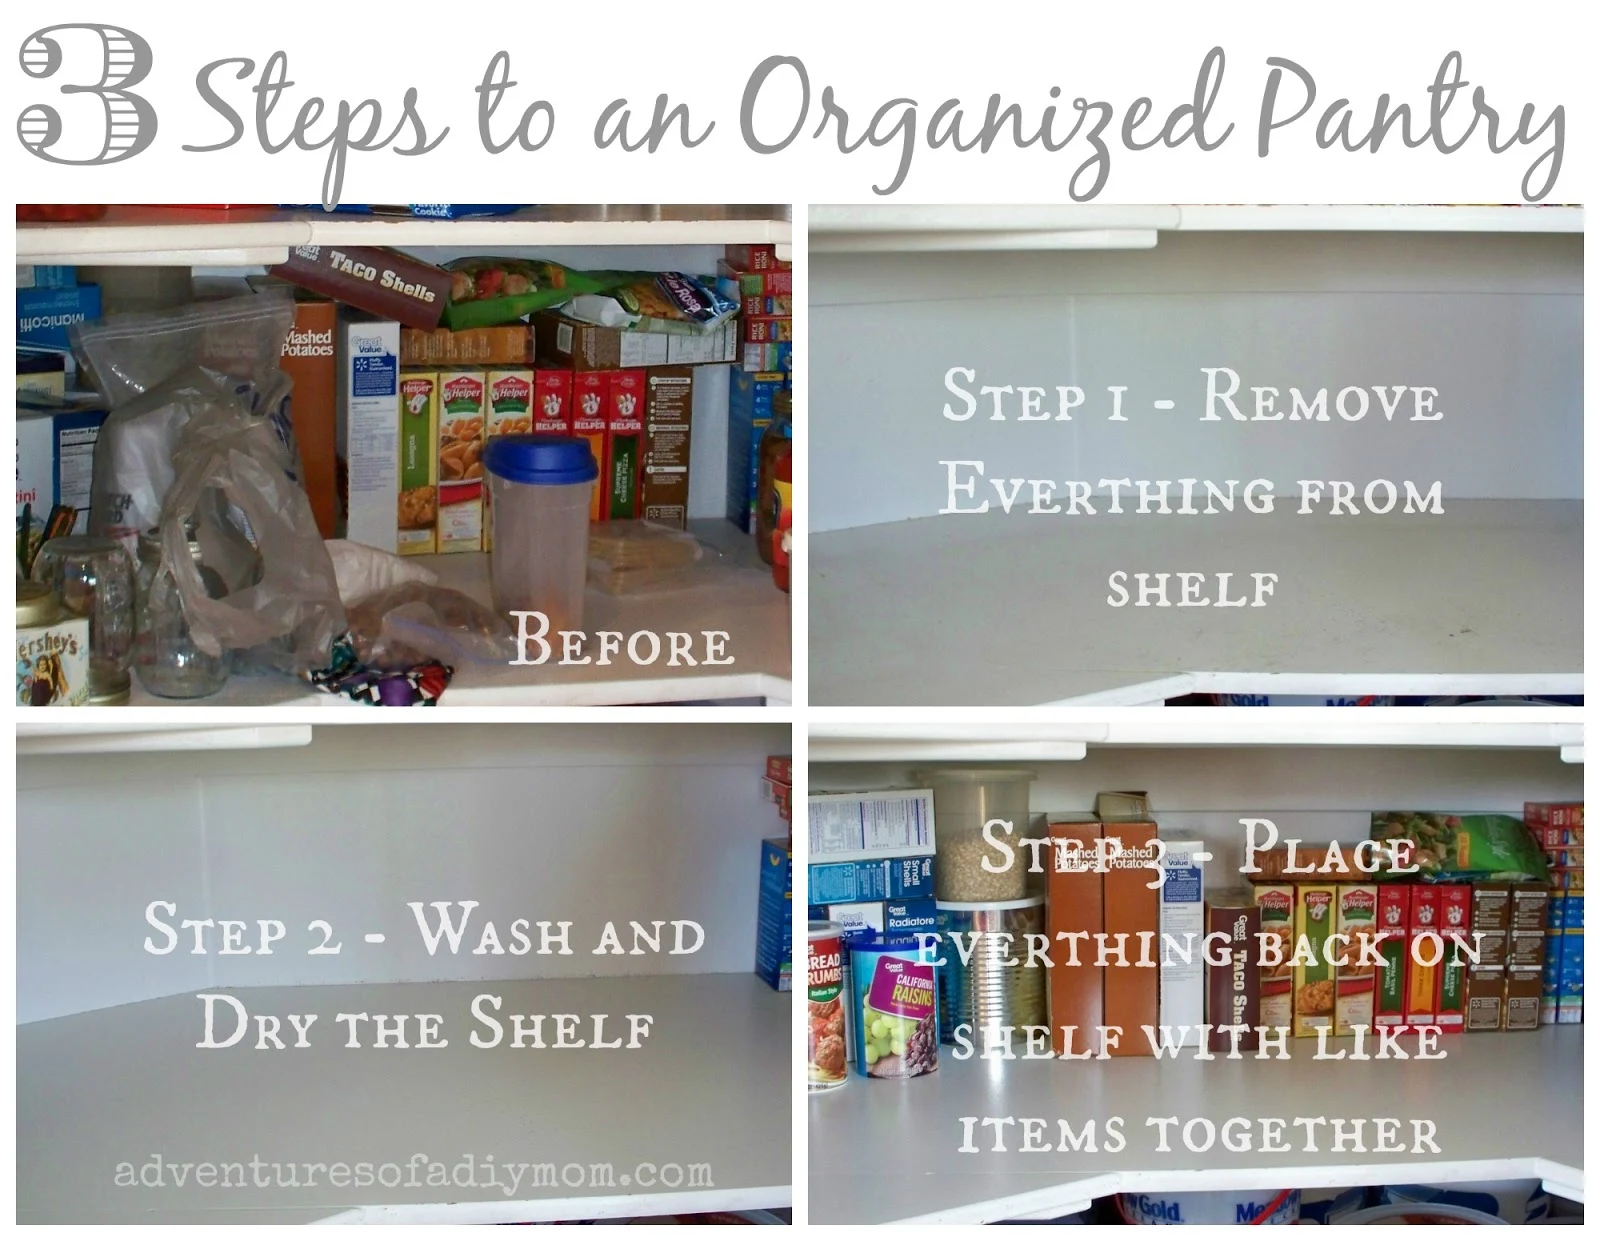 3 Steps to an Organized Pantry